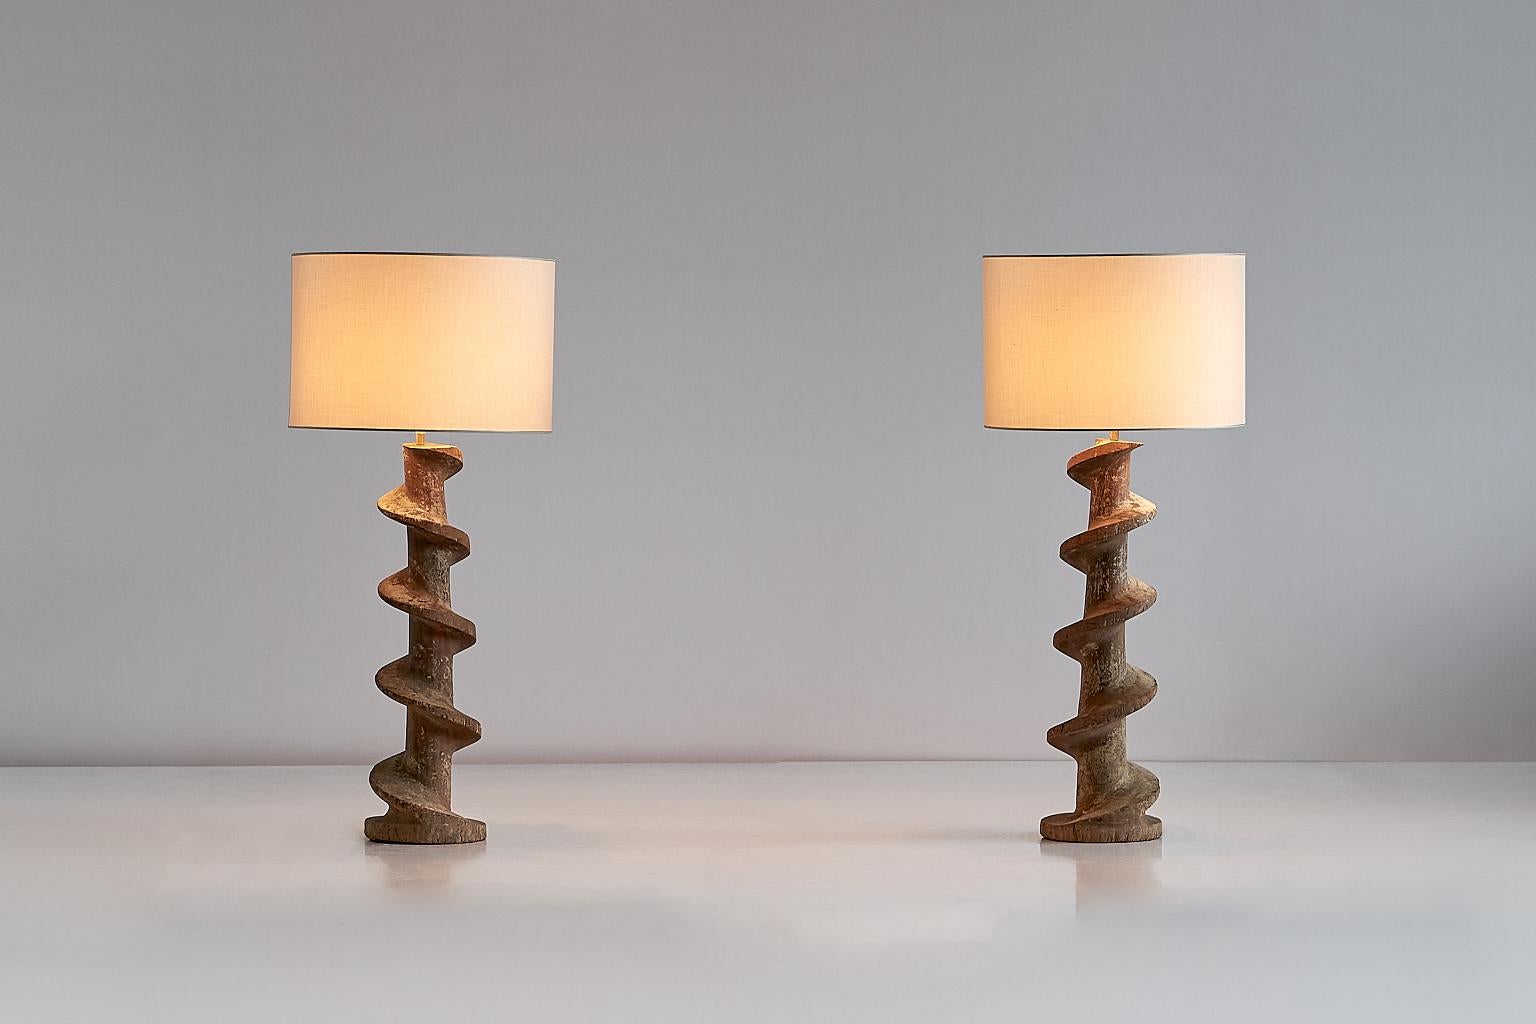 Pair of Table Lamps with Wooden Spiral Screw Base, Belgium, Late 19th Century 1